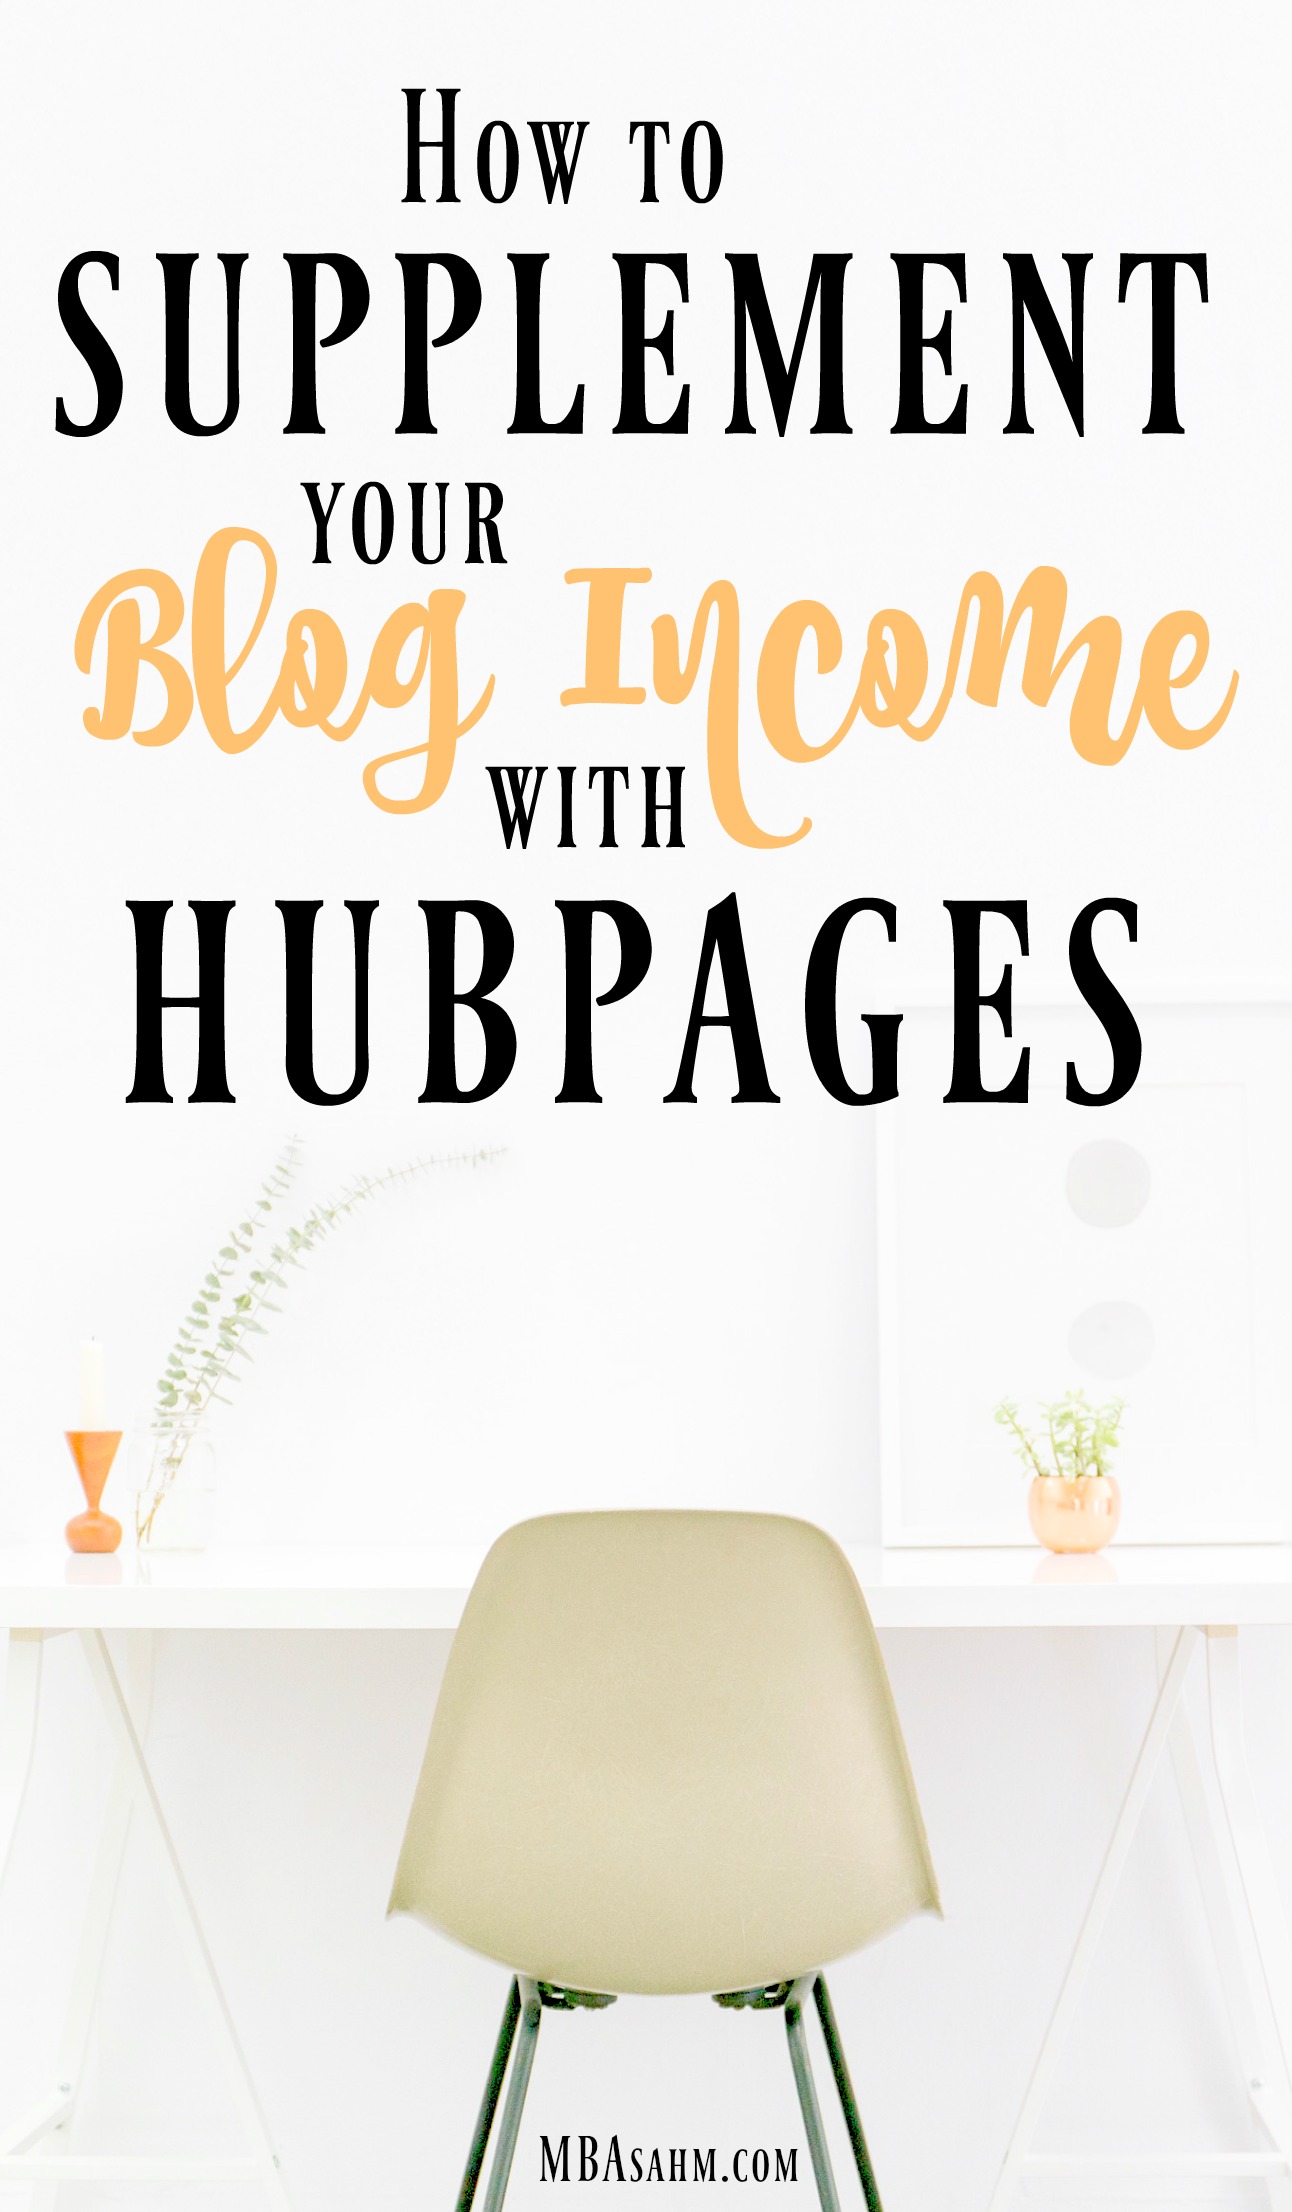 Once you start to monetize your blog, you'll find that you need to look in various places to supplement your blog income. Hubpages is the perfect place to diversify your earnings and still support your blog!